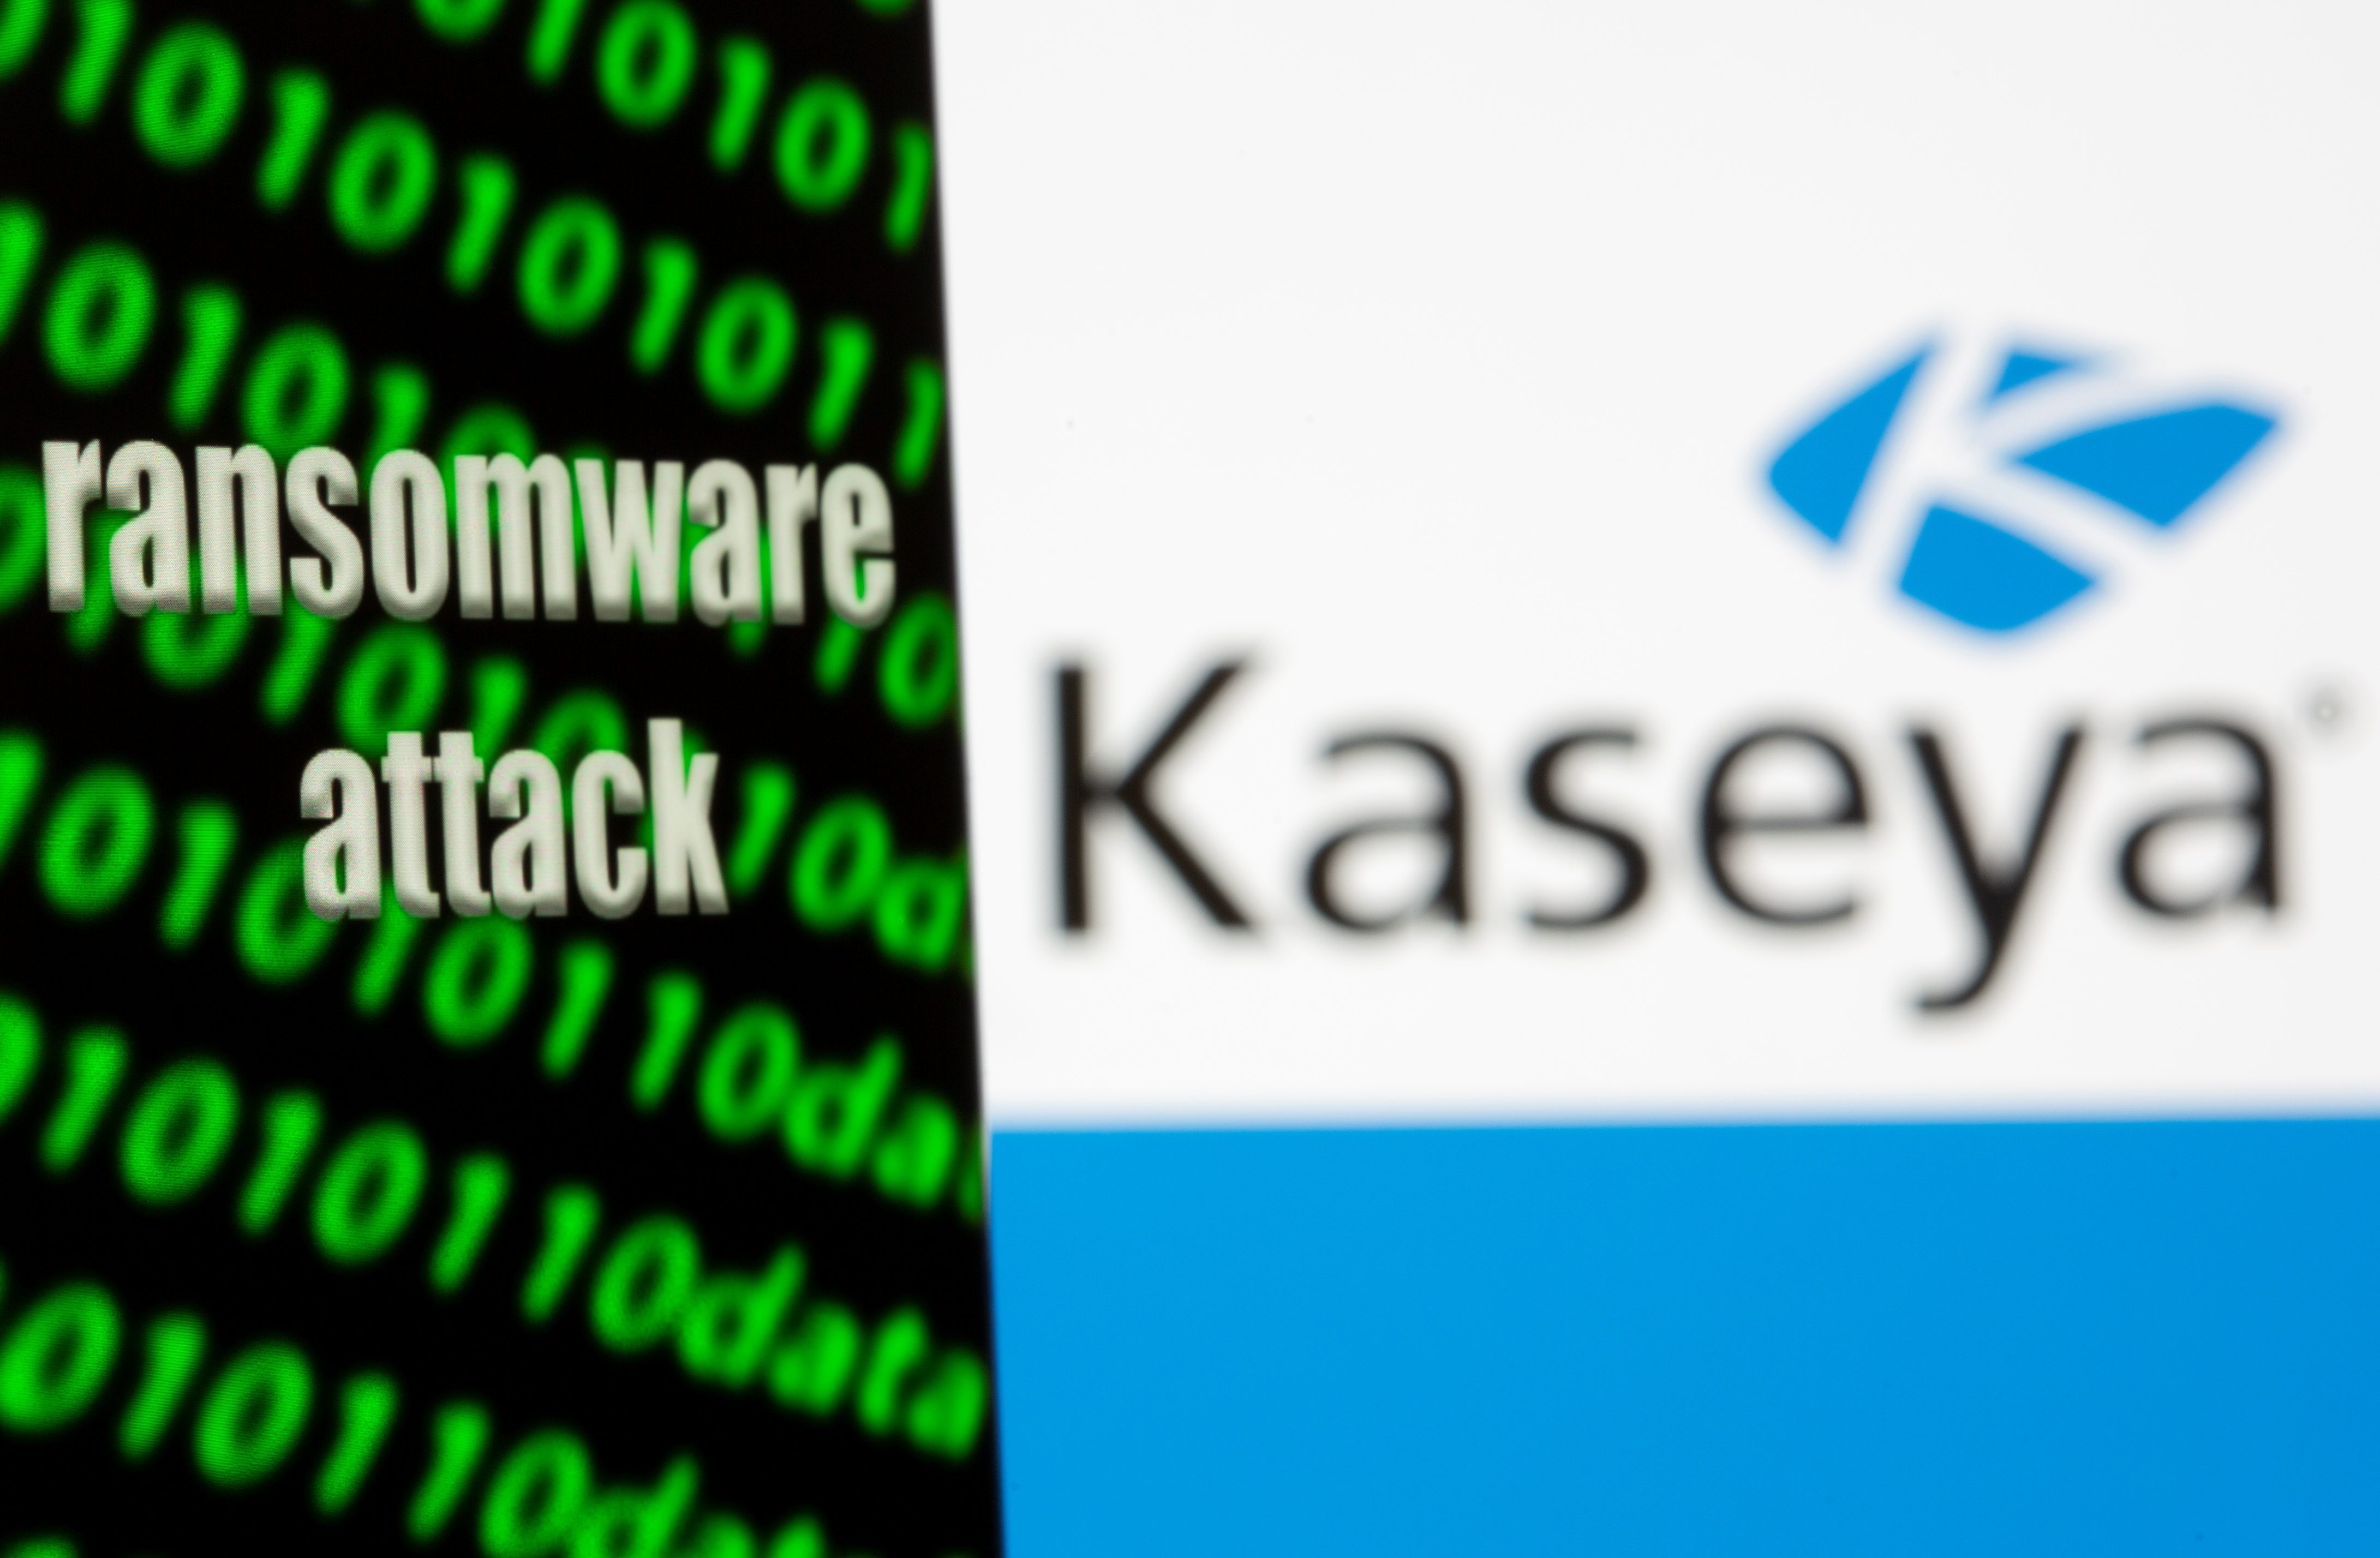 Up to 1,500 businesses affected by ransomware attack, Kaseya’s CEO says